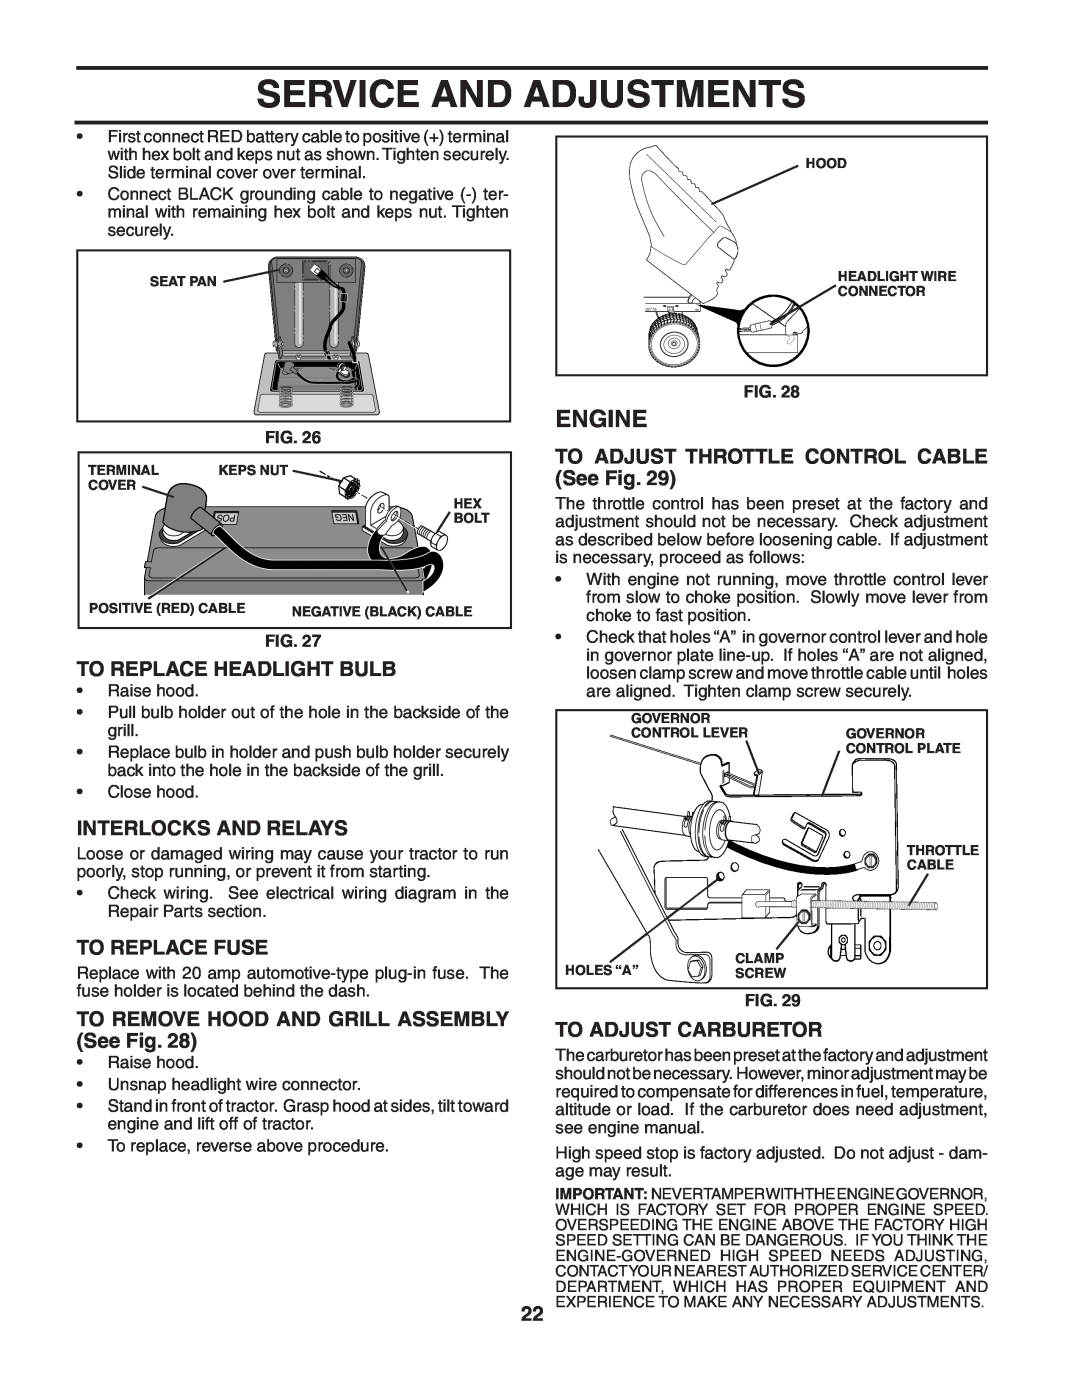 Poulan PO17542STA manual To Replace Headlight Bulb, Interlocks And Relays, To Replace Fuse, To Adjust Carburetor, Engine 